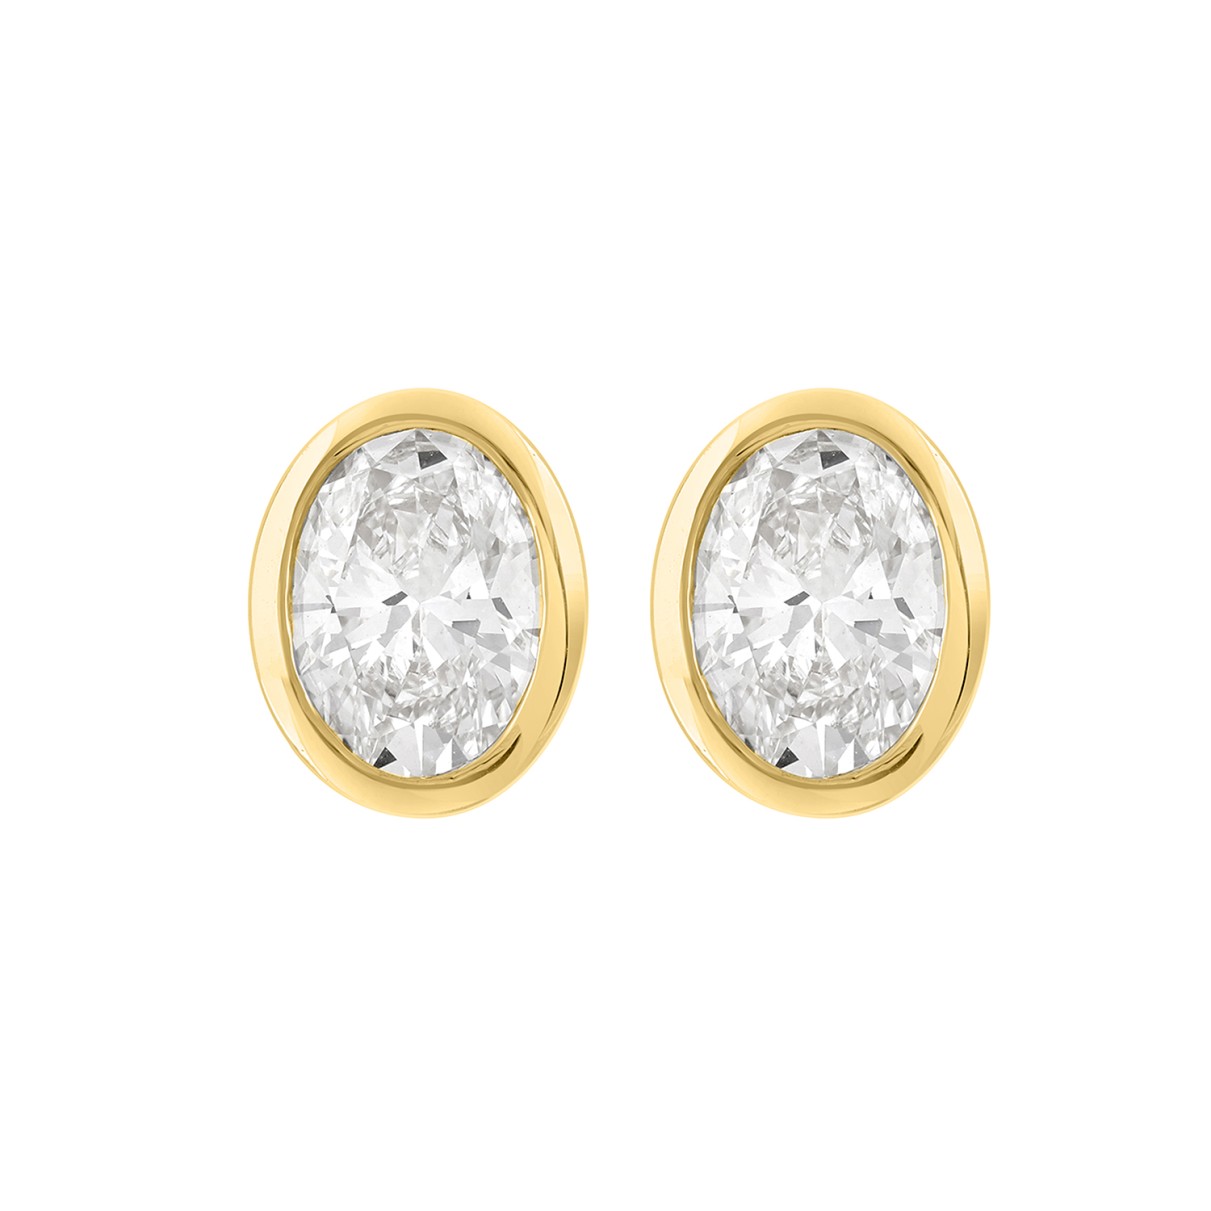 LADIES SOLITAIRE EARRING 3CT OVAL DIAMOND 14K YELL...